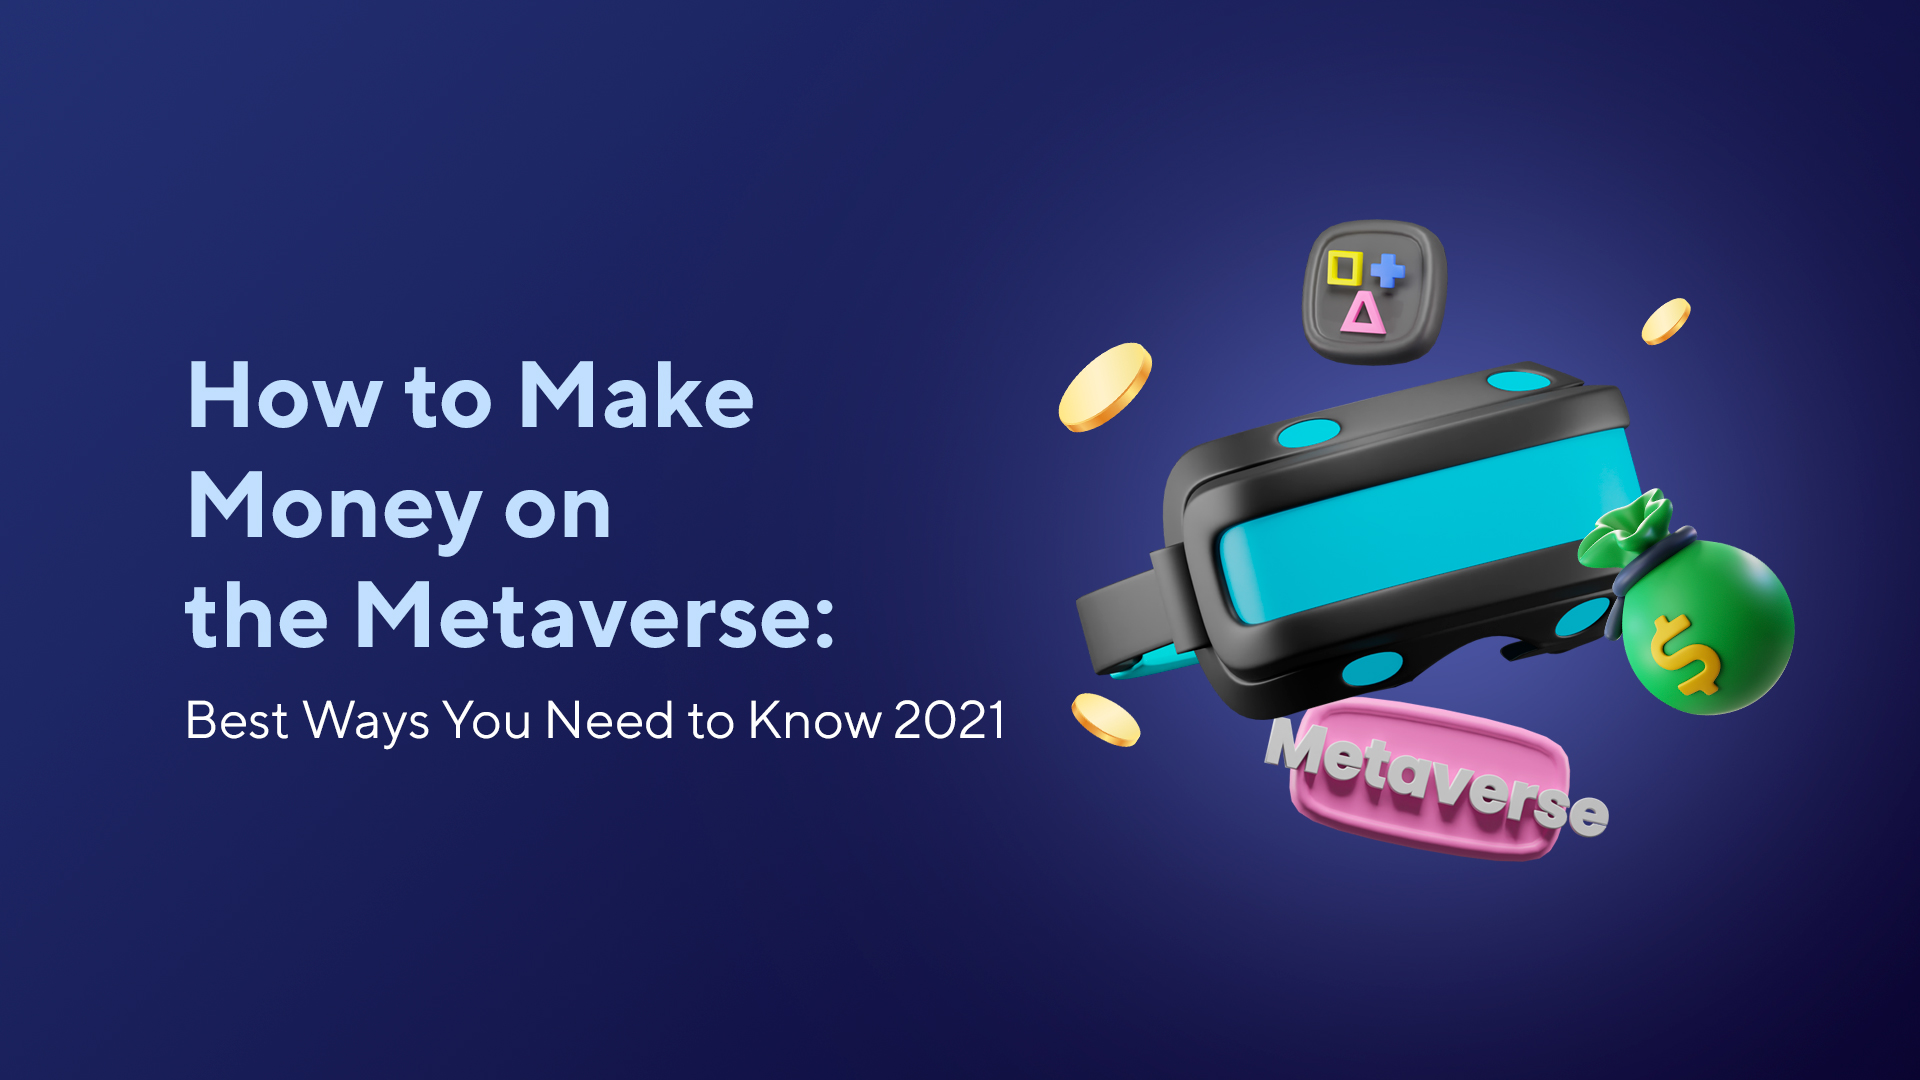 How to Make Money on the Metaverse: Key Ways You Need to Know 2022